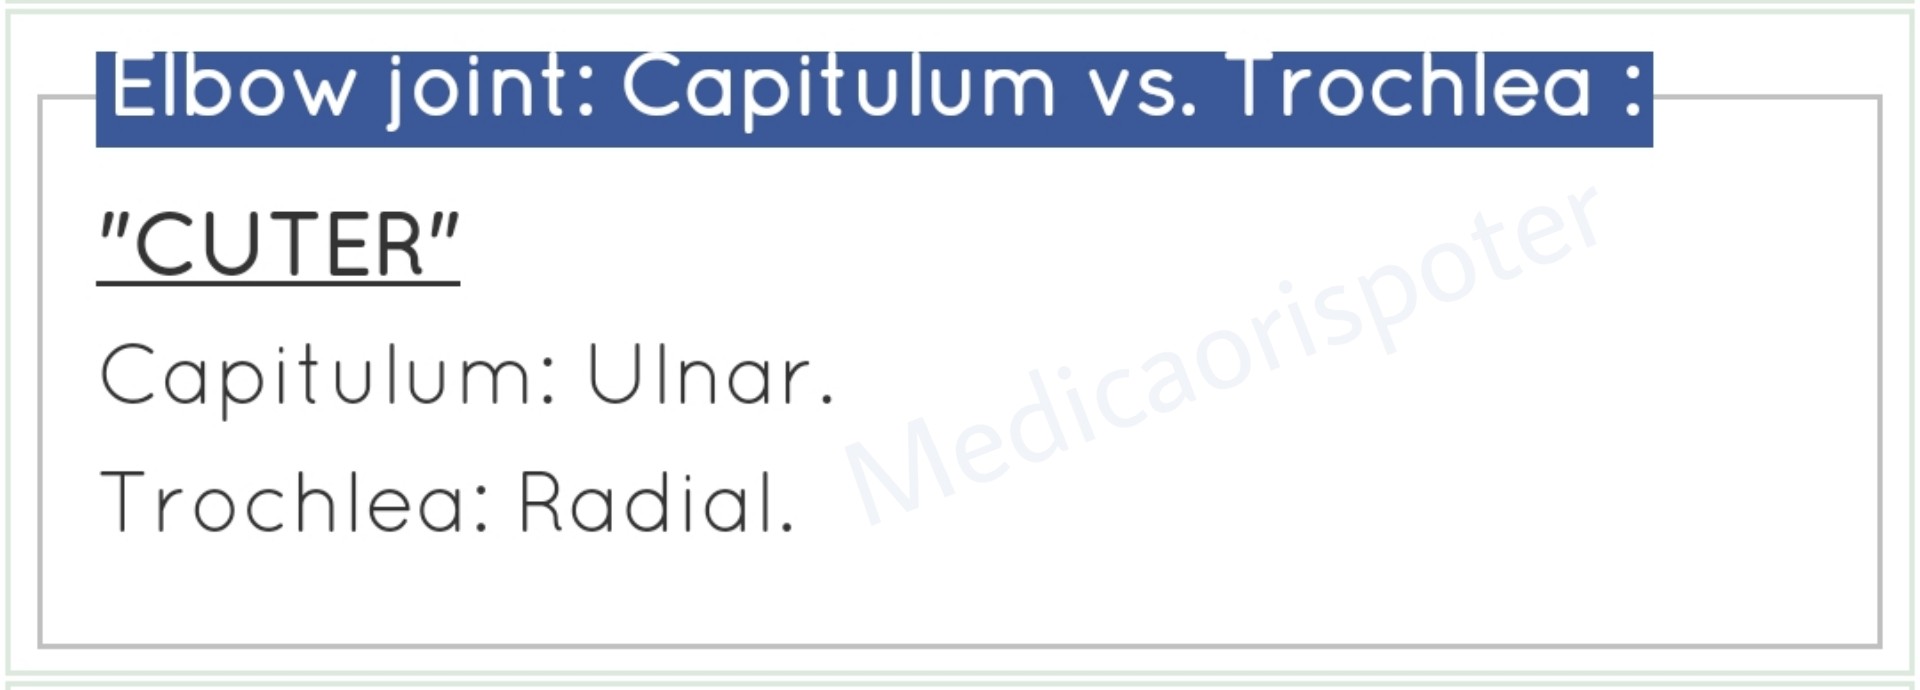 Capitulum and Trochlear in Elbow Joint